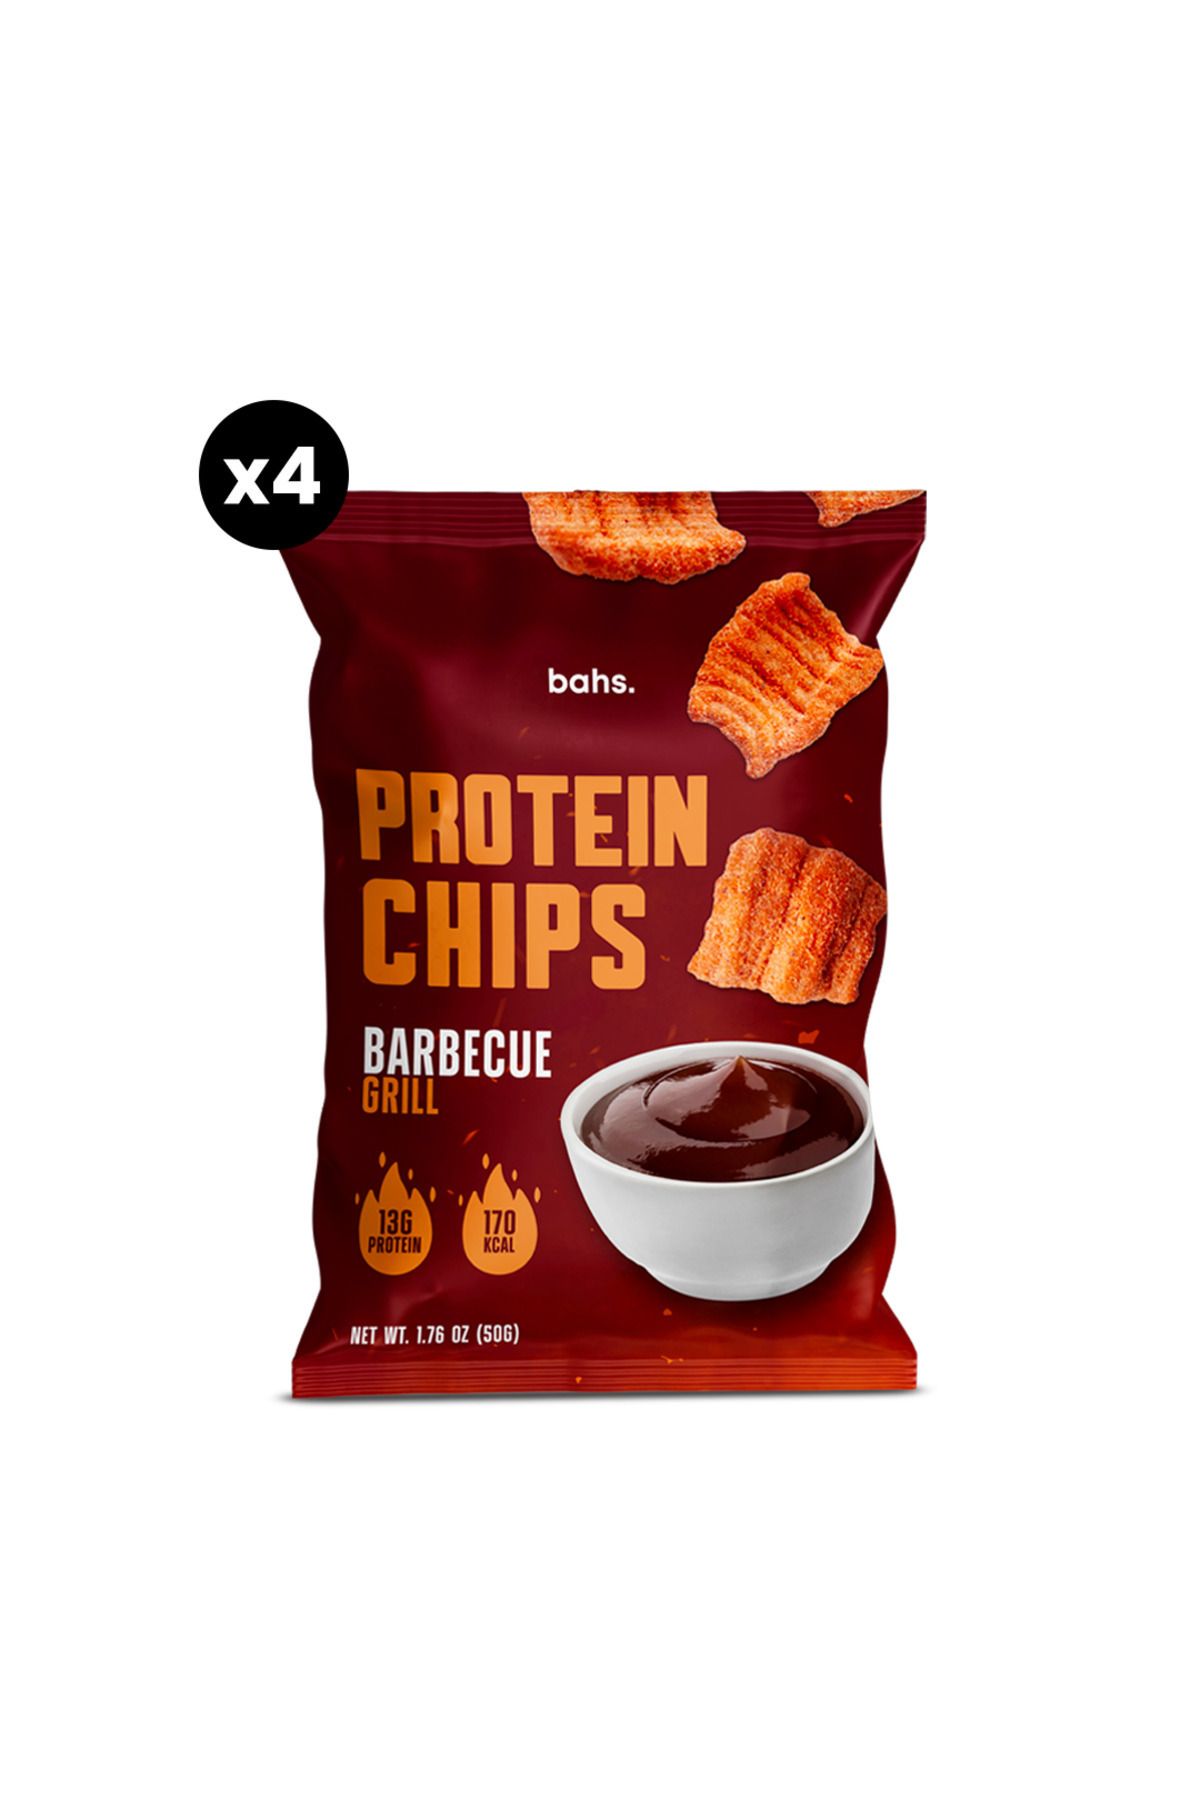 Bahs Protein Chips - Barbecue Grill - x4 Adet